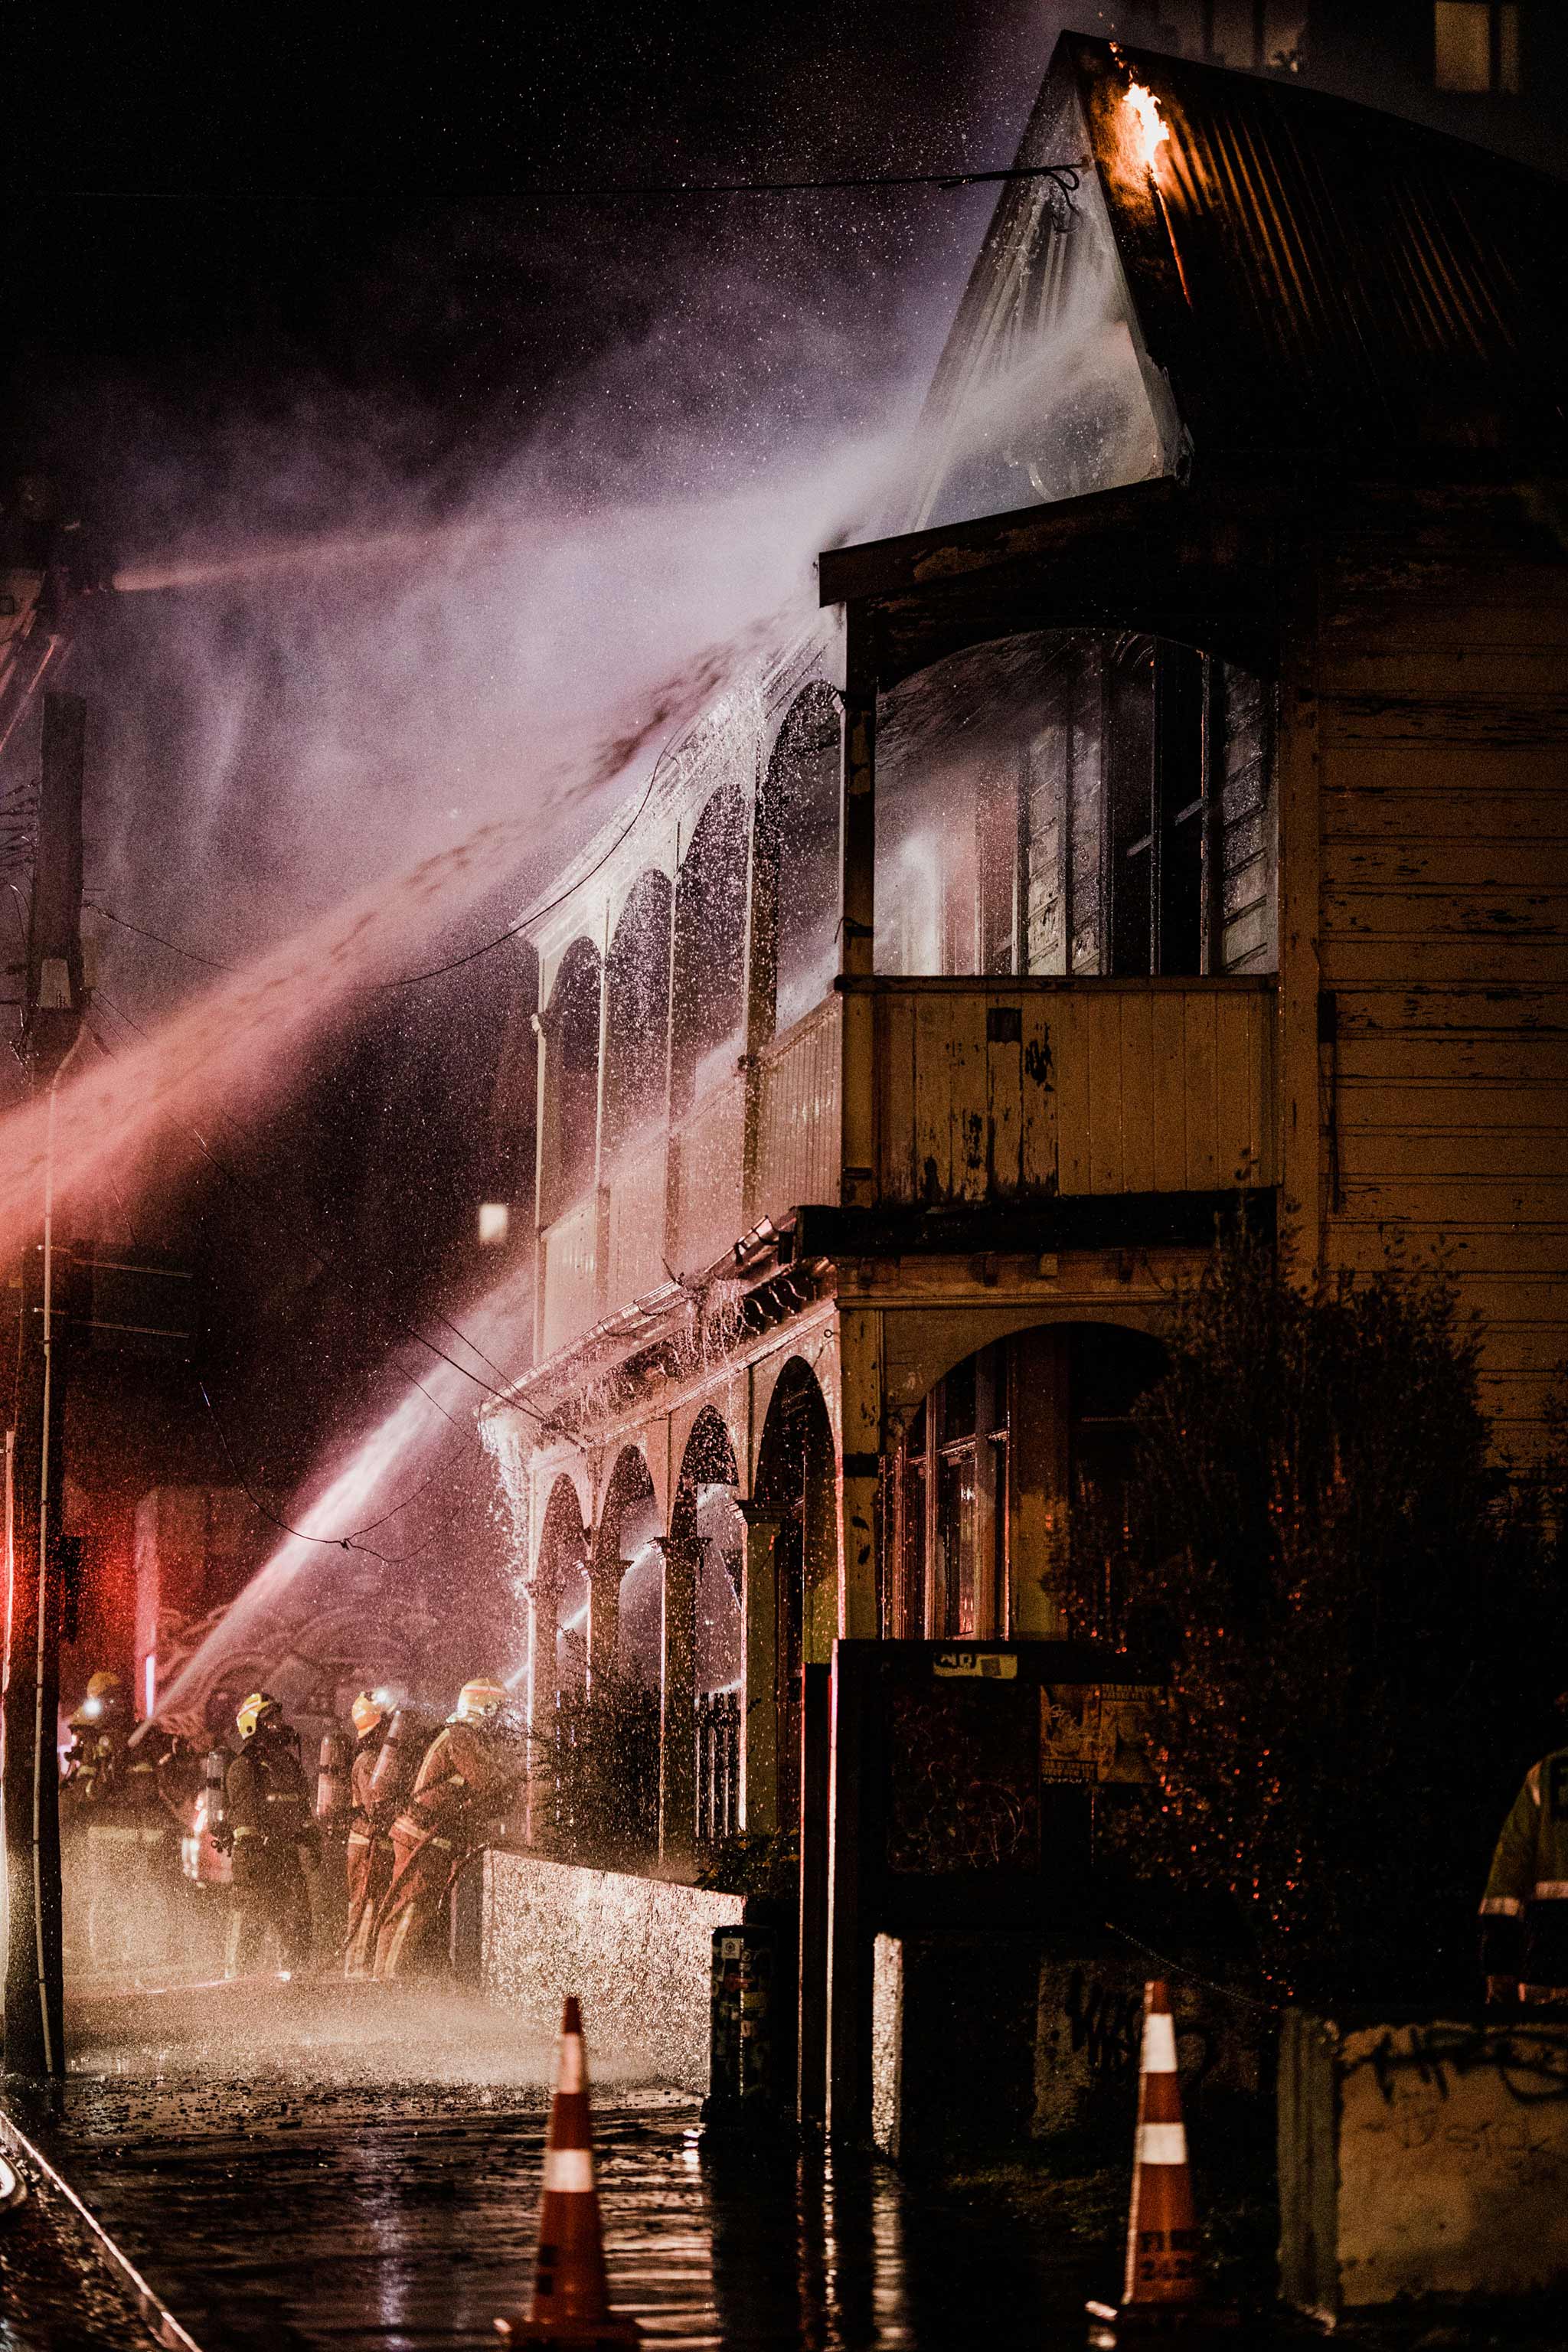 Photo of fireman spraying water on a burning house.